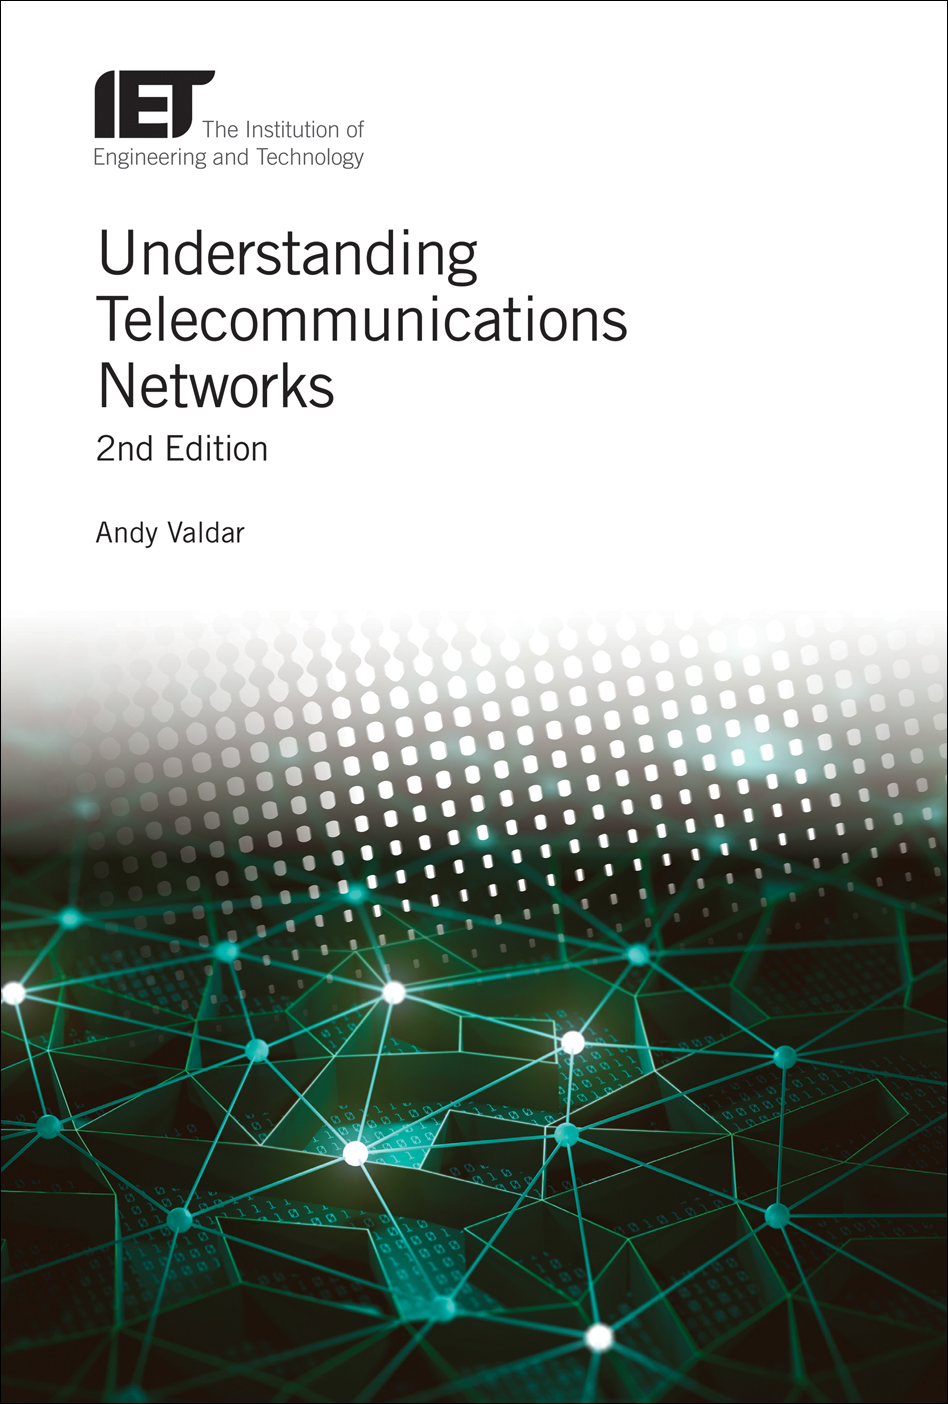 Understanding Telecommunications Networks, 2nd Edition